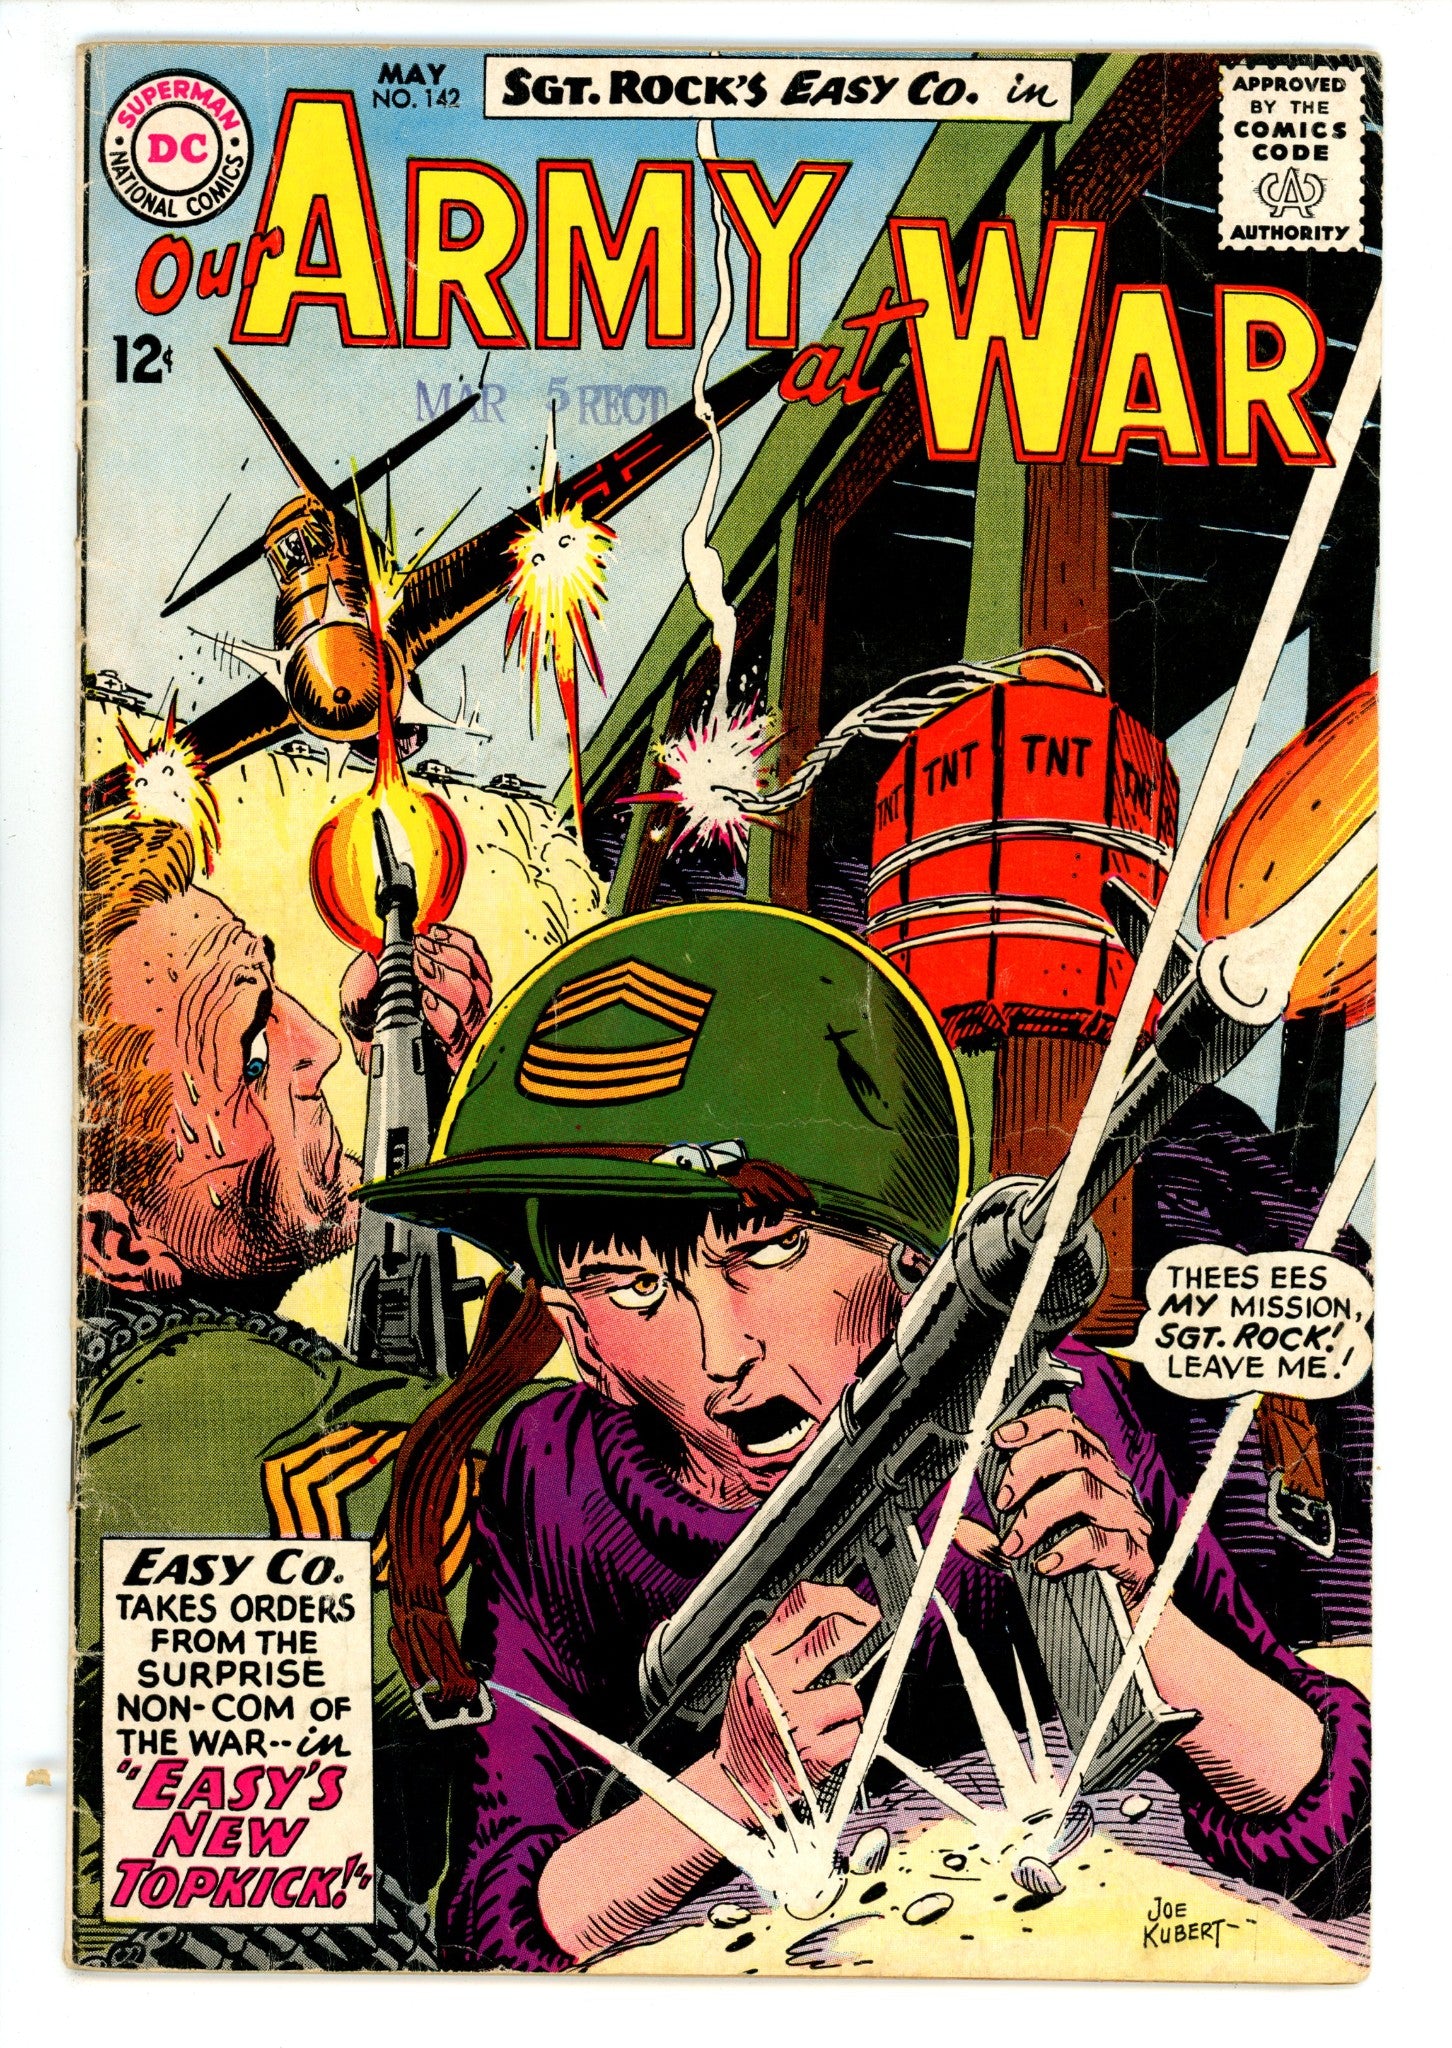 Our Army at War Vol 1 142 VG (4.0) (1964) 